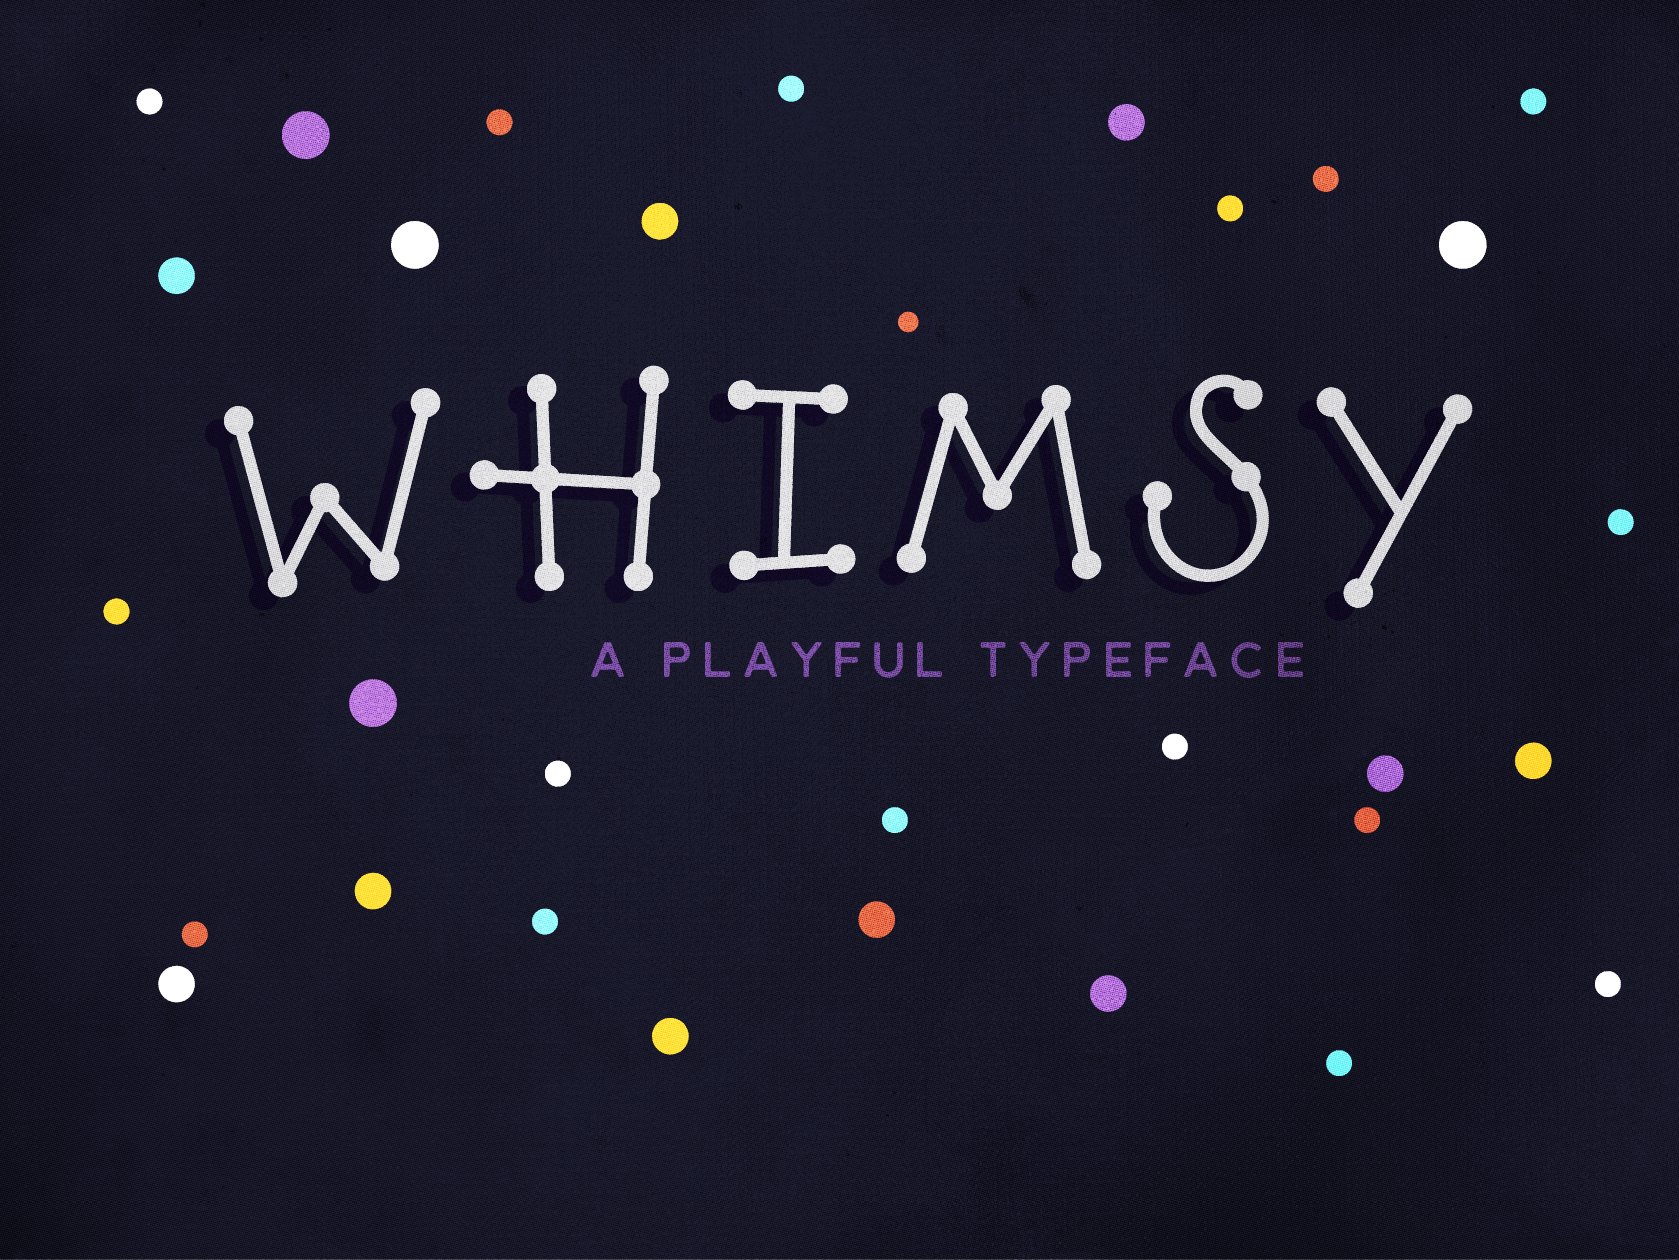 Whimsy cover image.